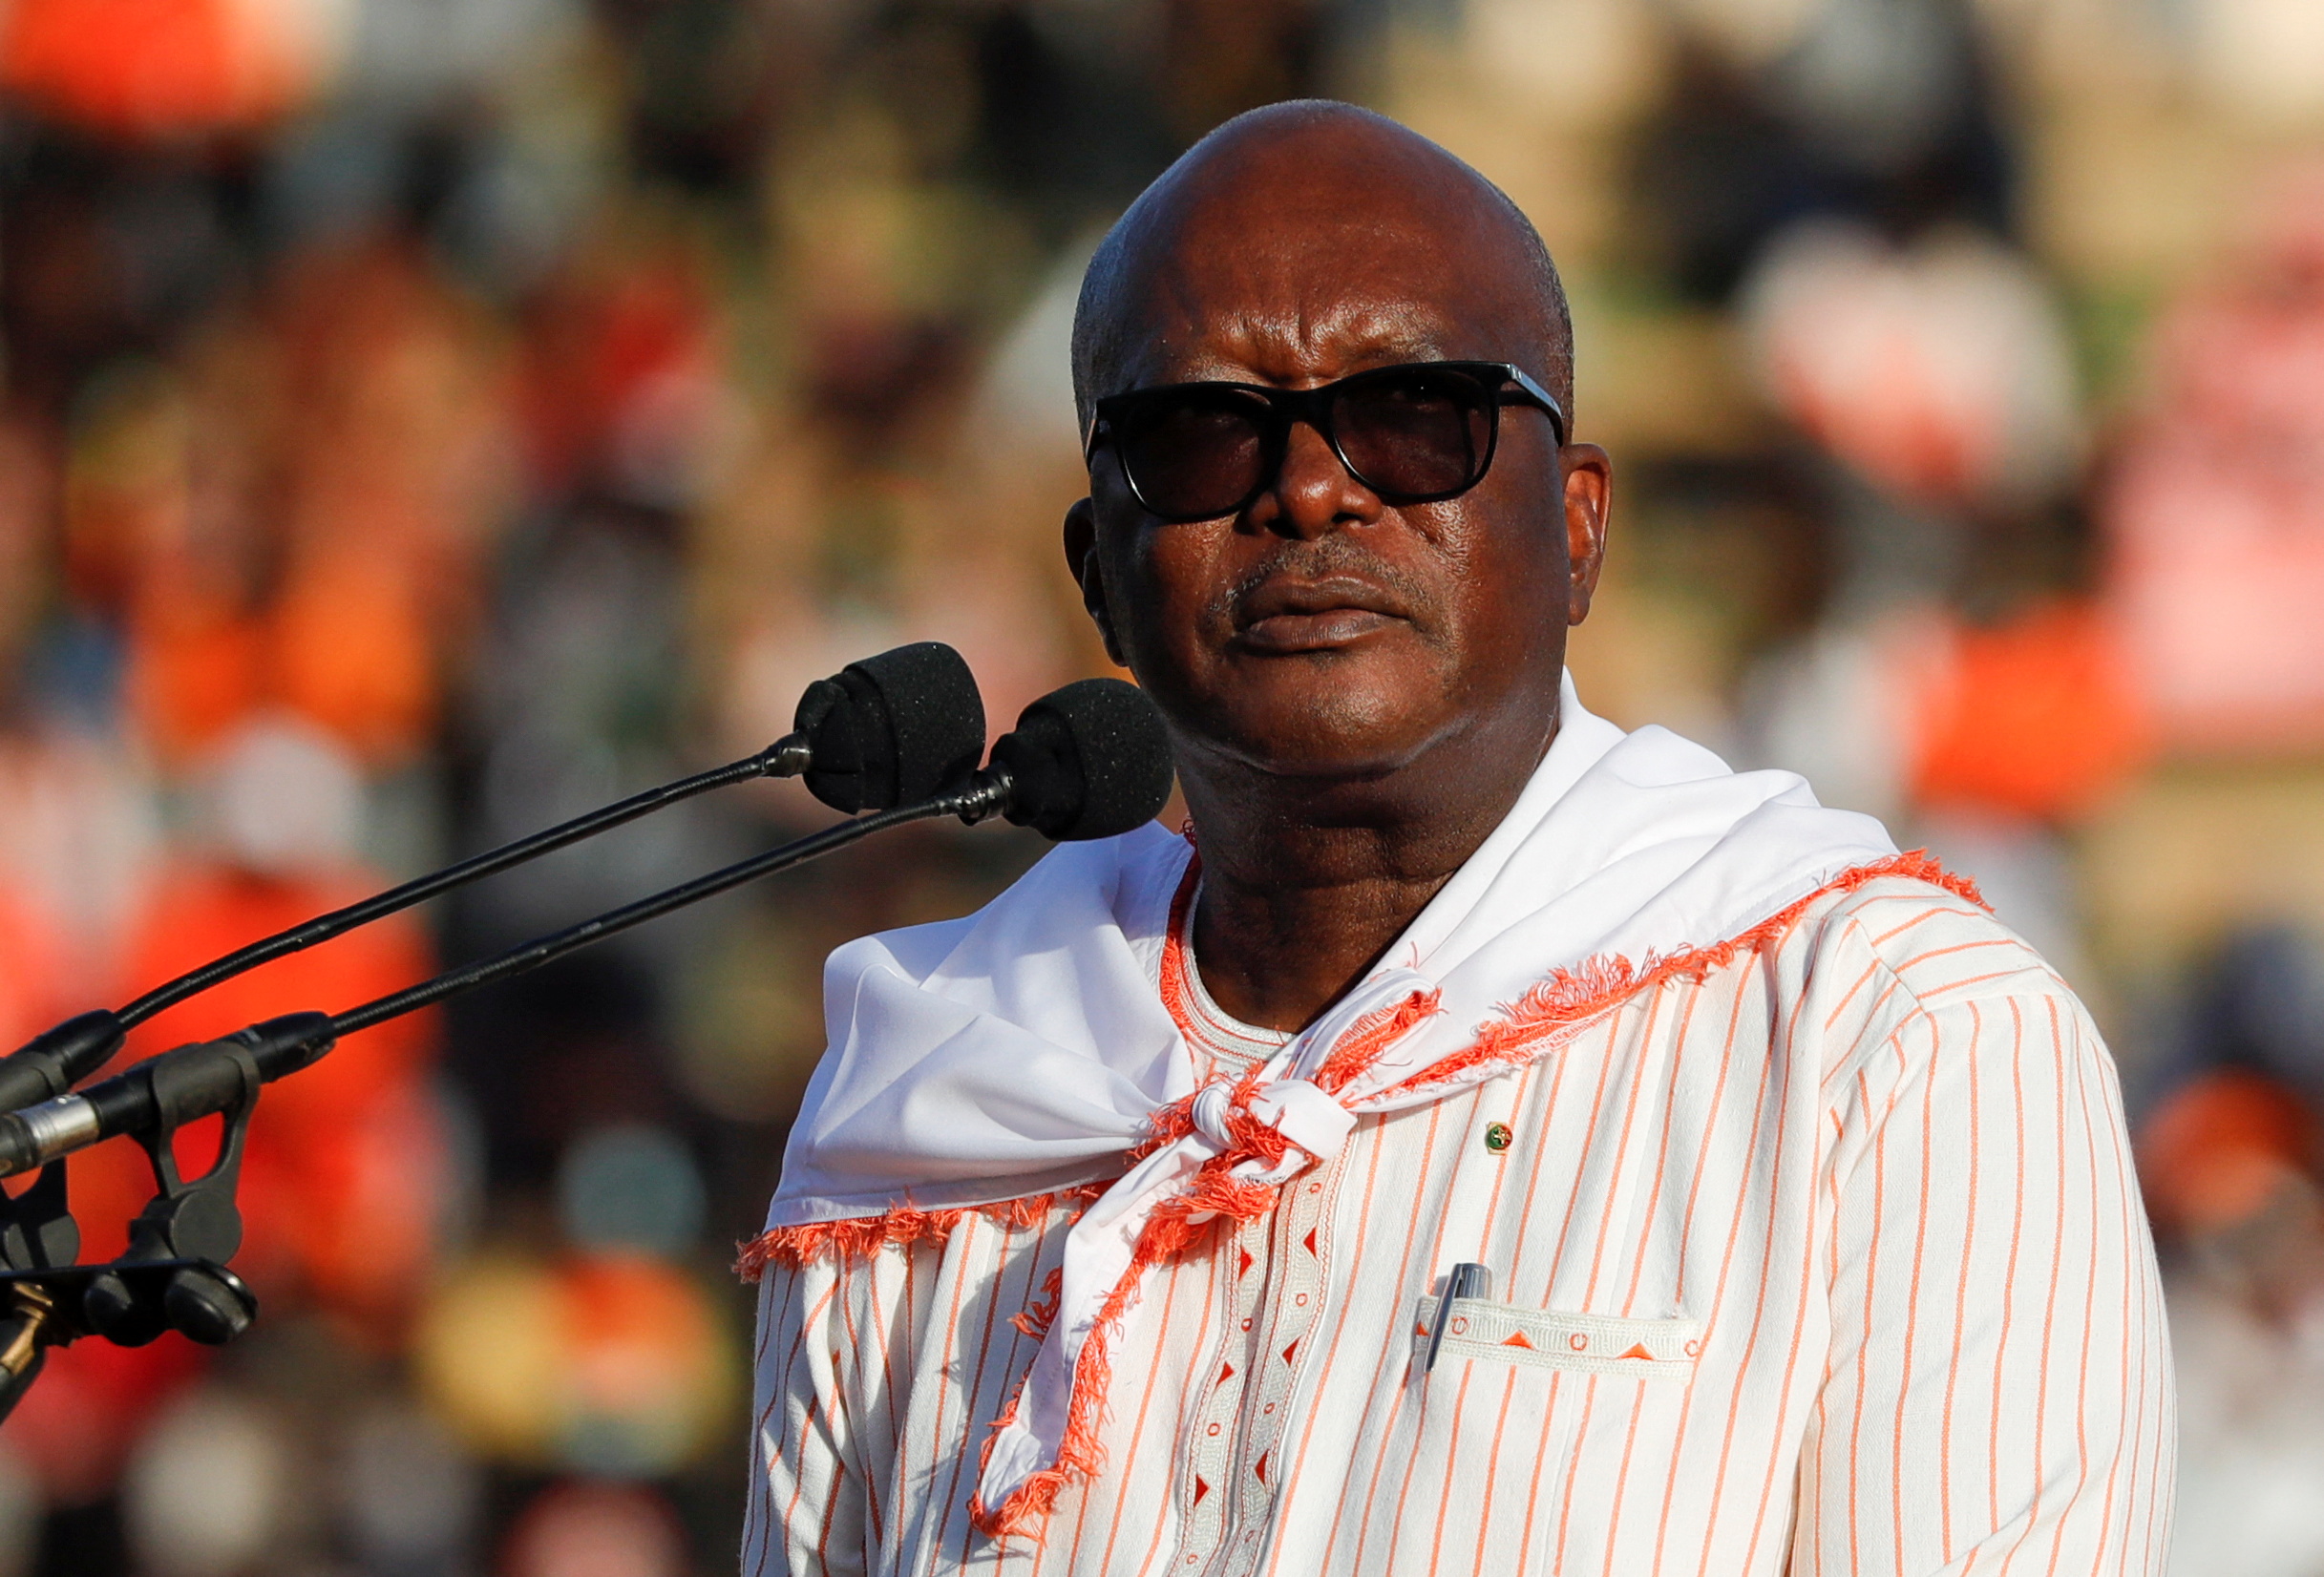 President Kabore holds final rally ahead of presidential election in Burkina Faso